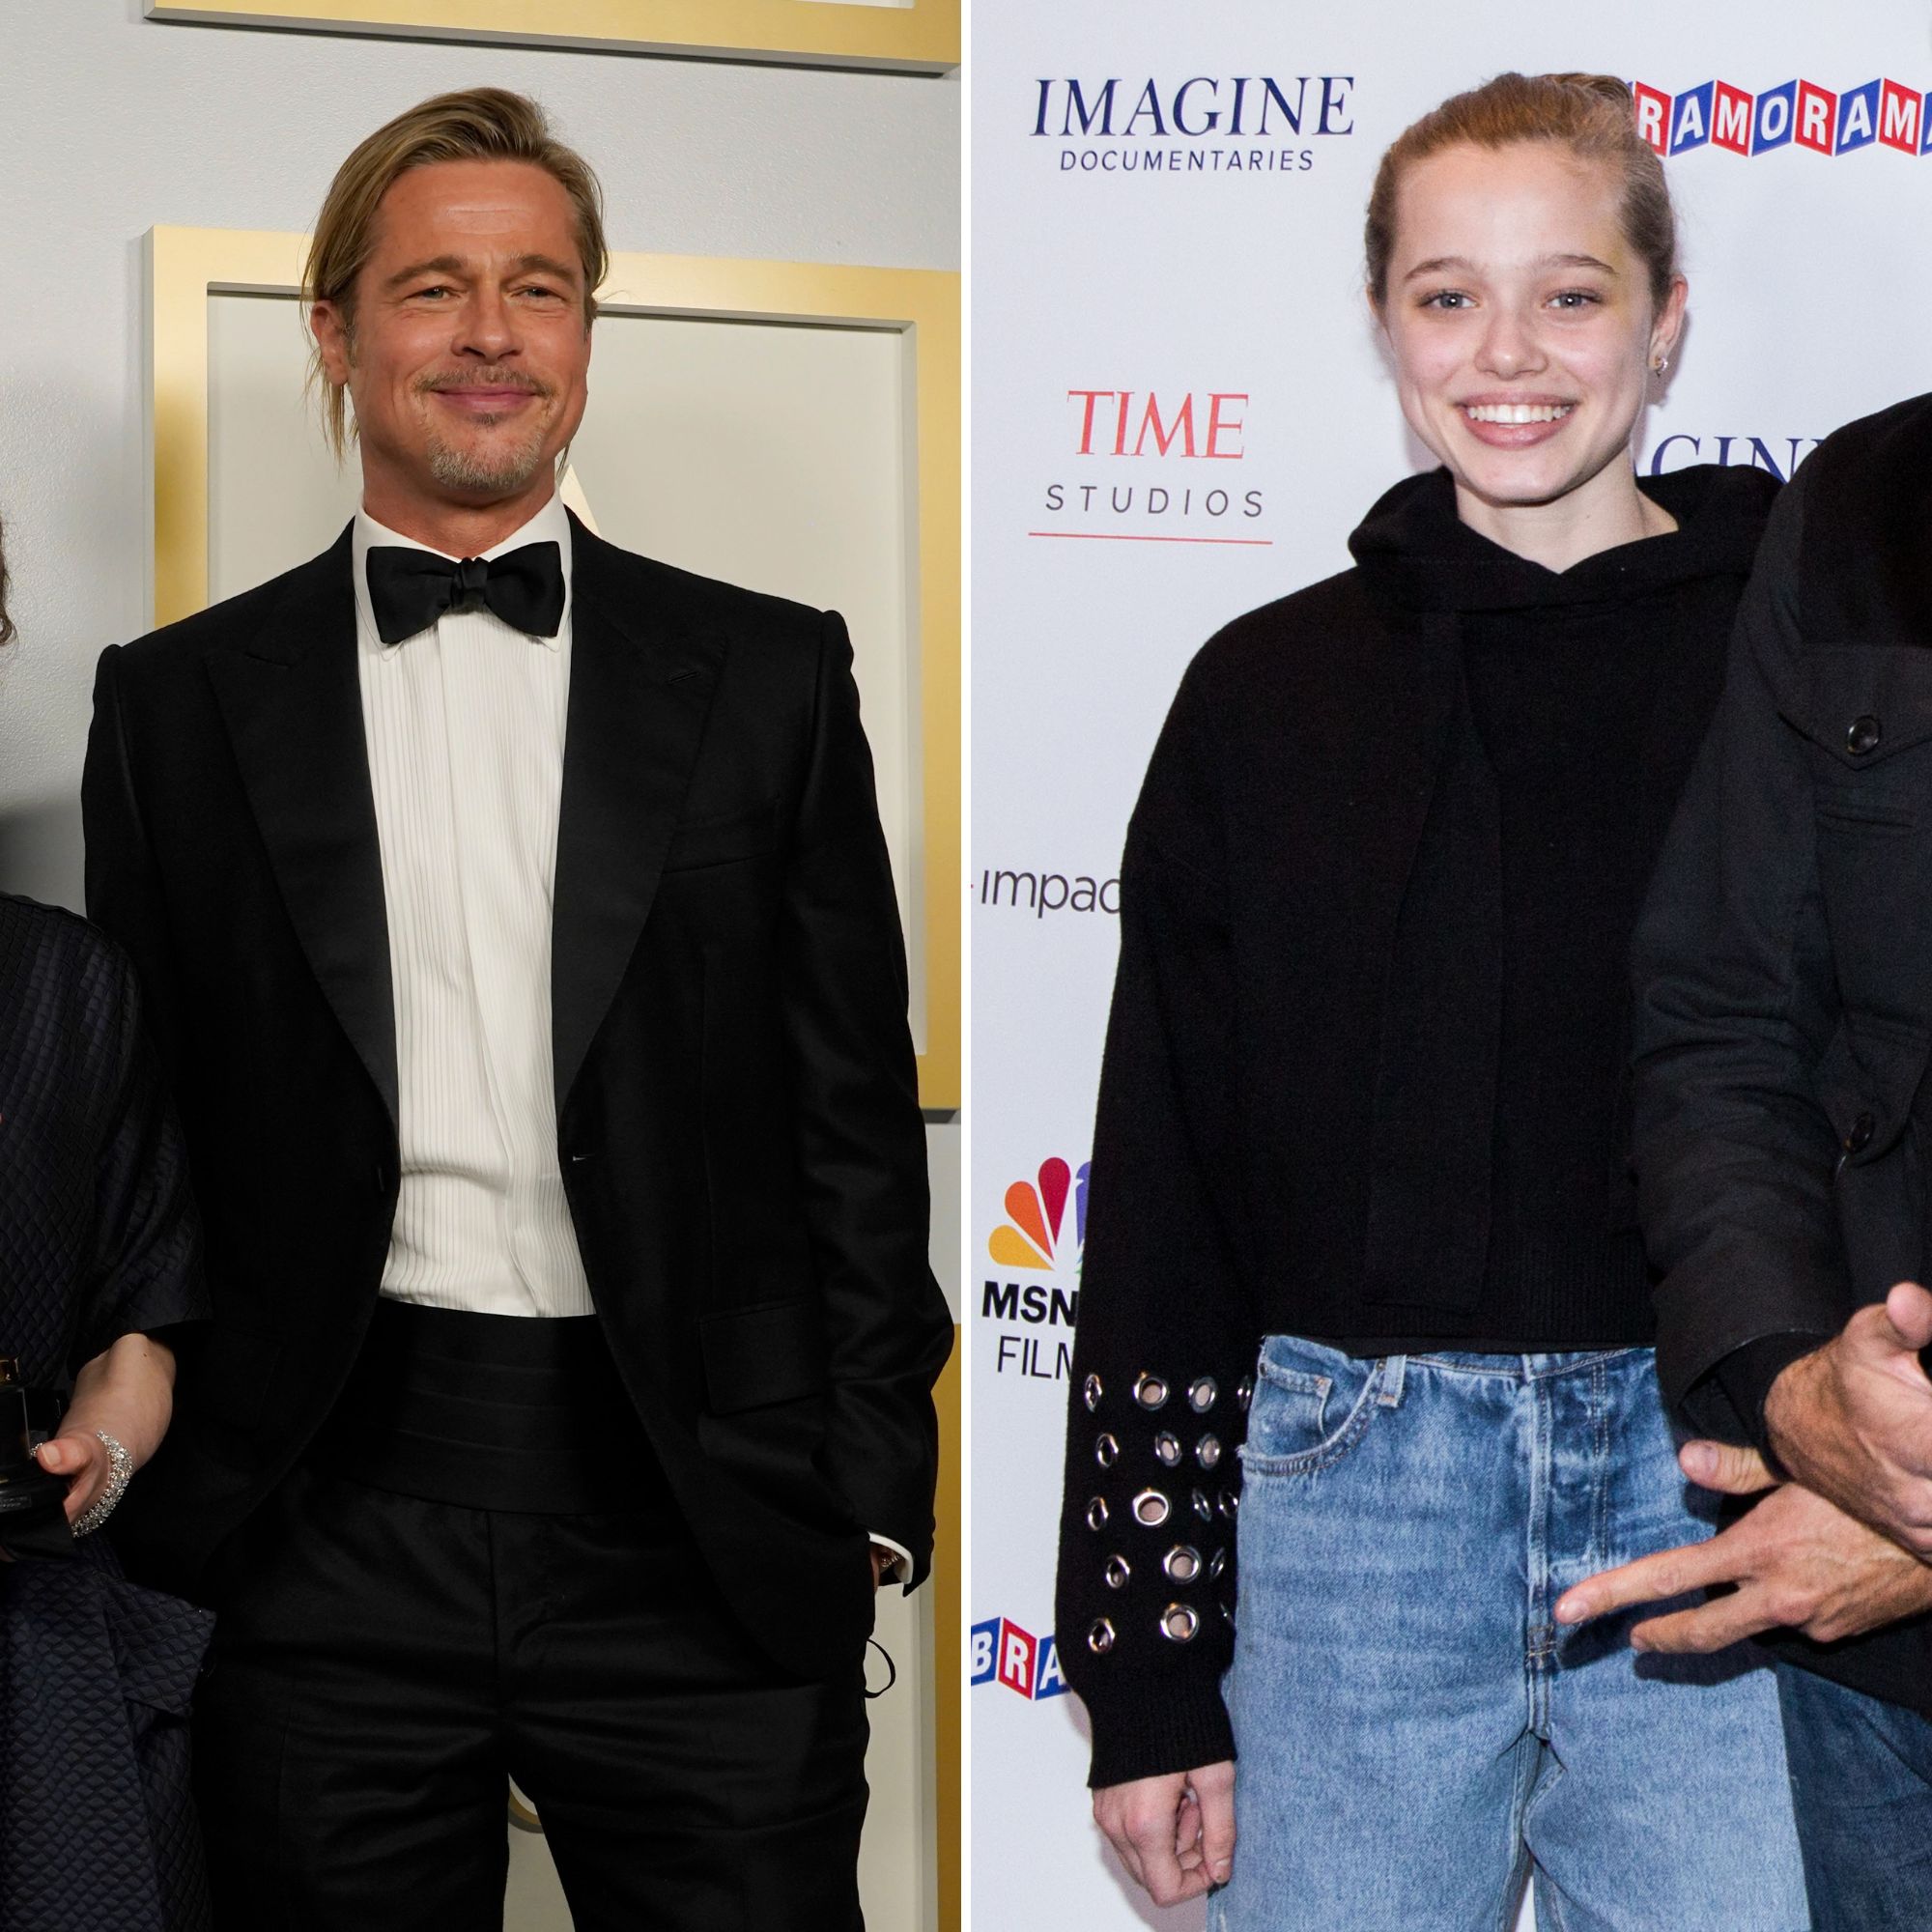 Angelina Jolie Not Happy Shiloh's Moving In With Brad Pitt